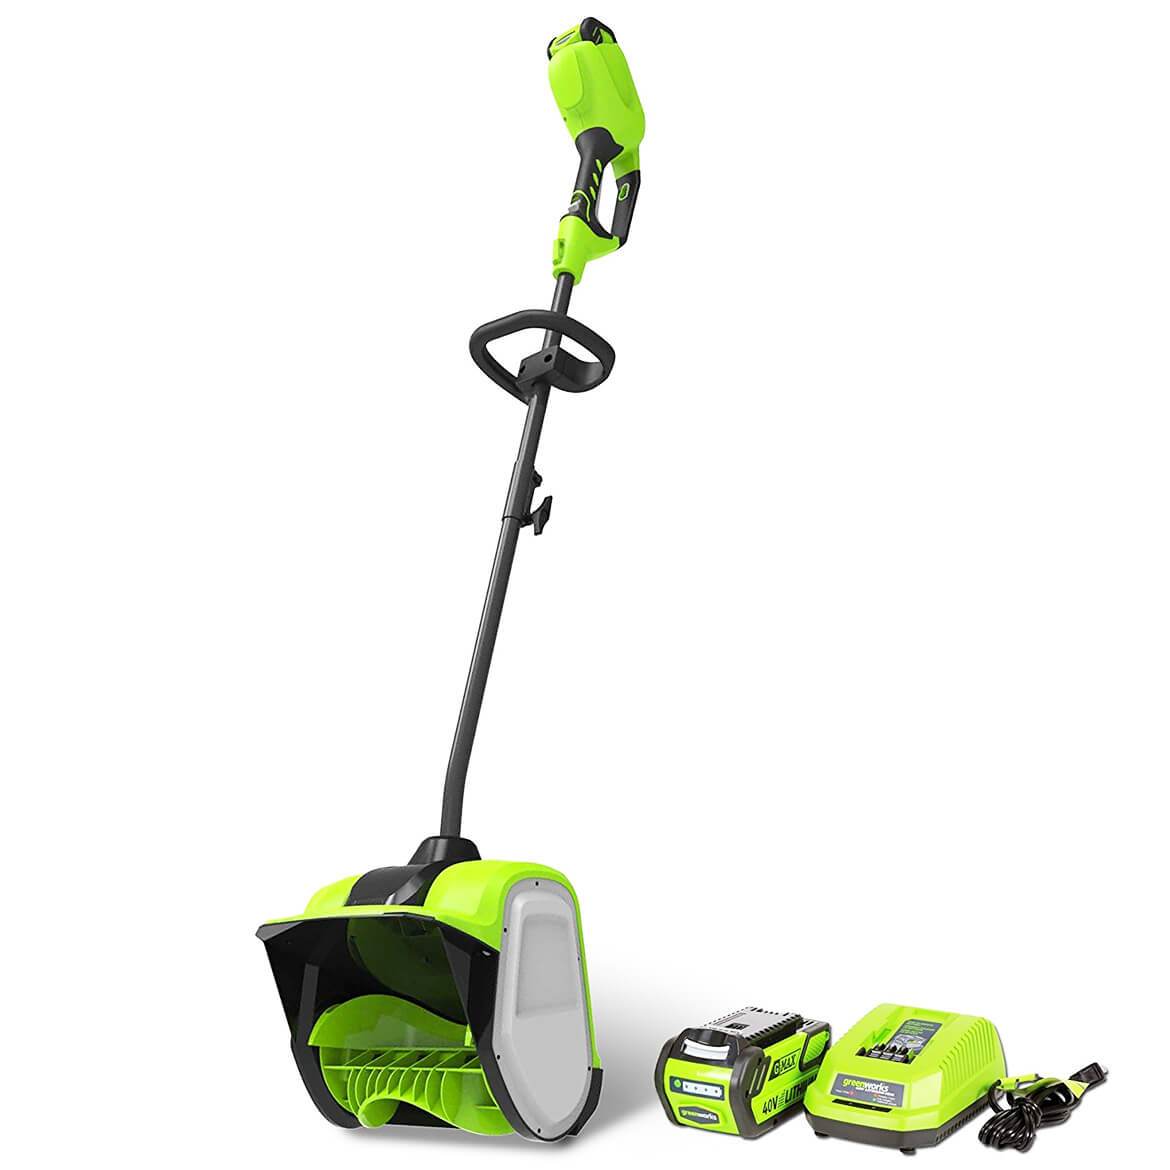 Greenworks 12" 40V Single-Stage Battery Powered Push Snow Blower - image 1 of 8